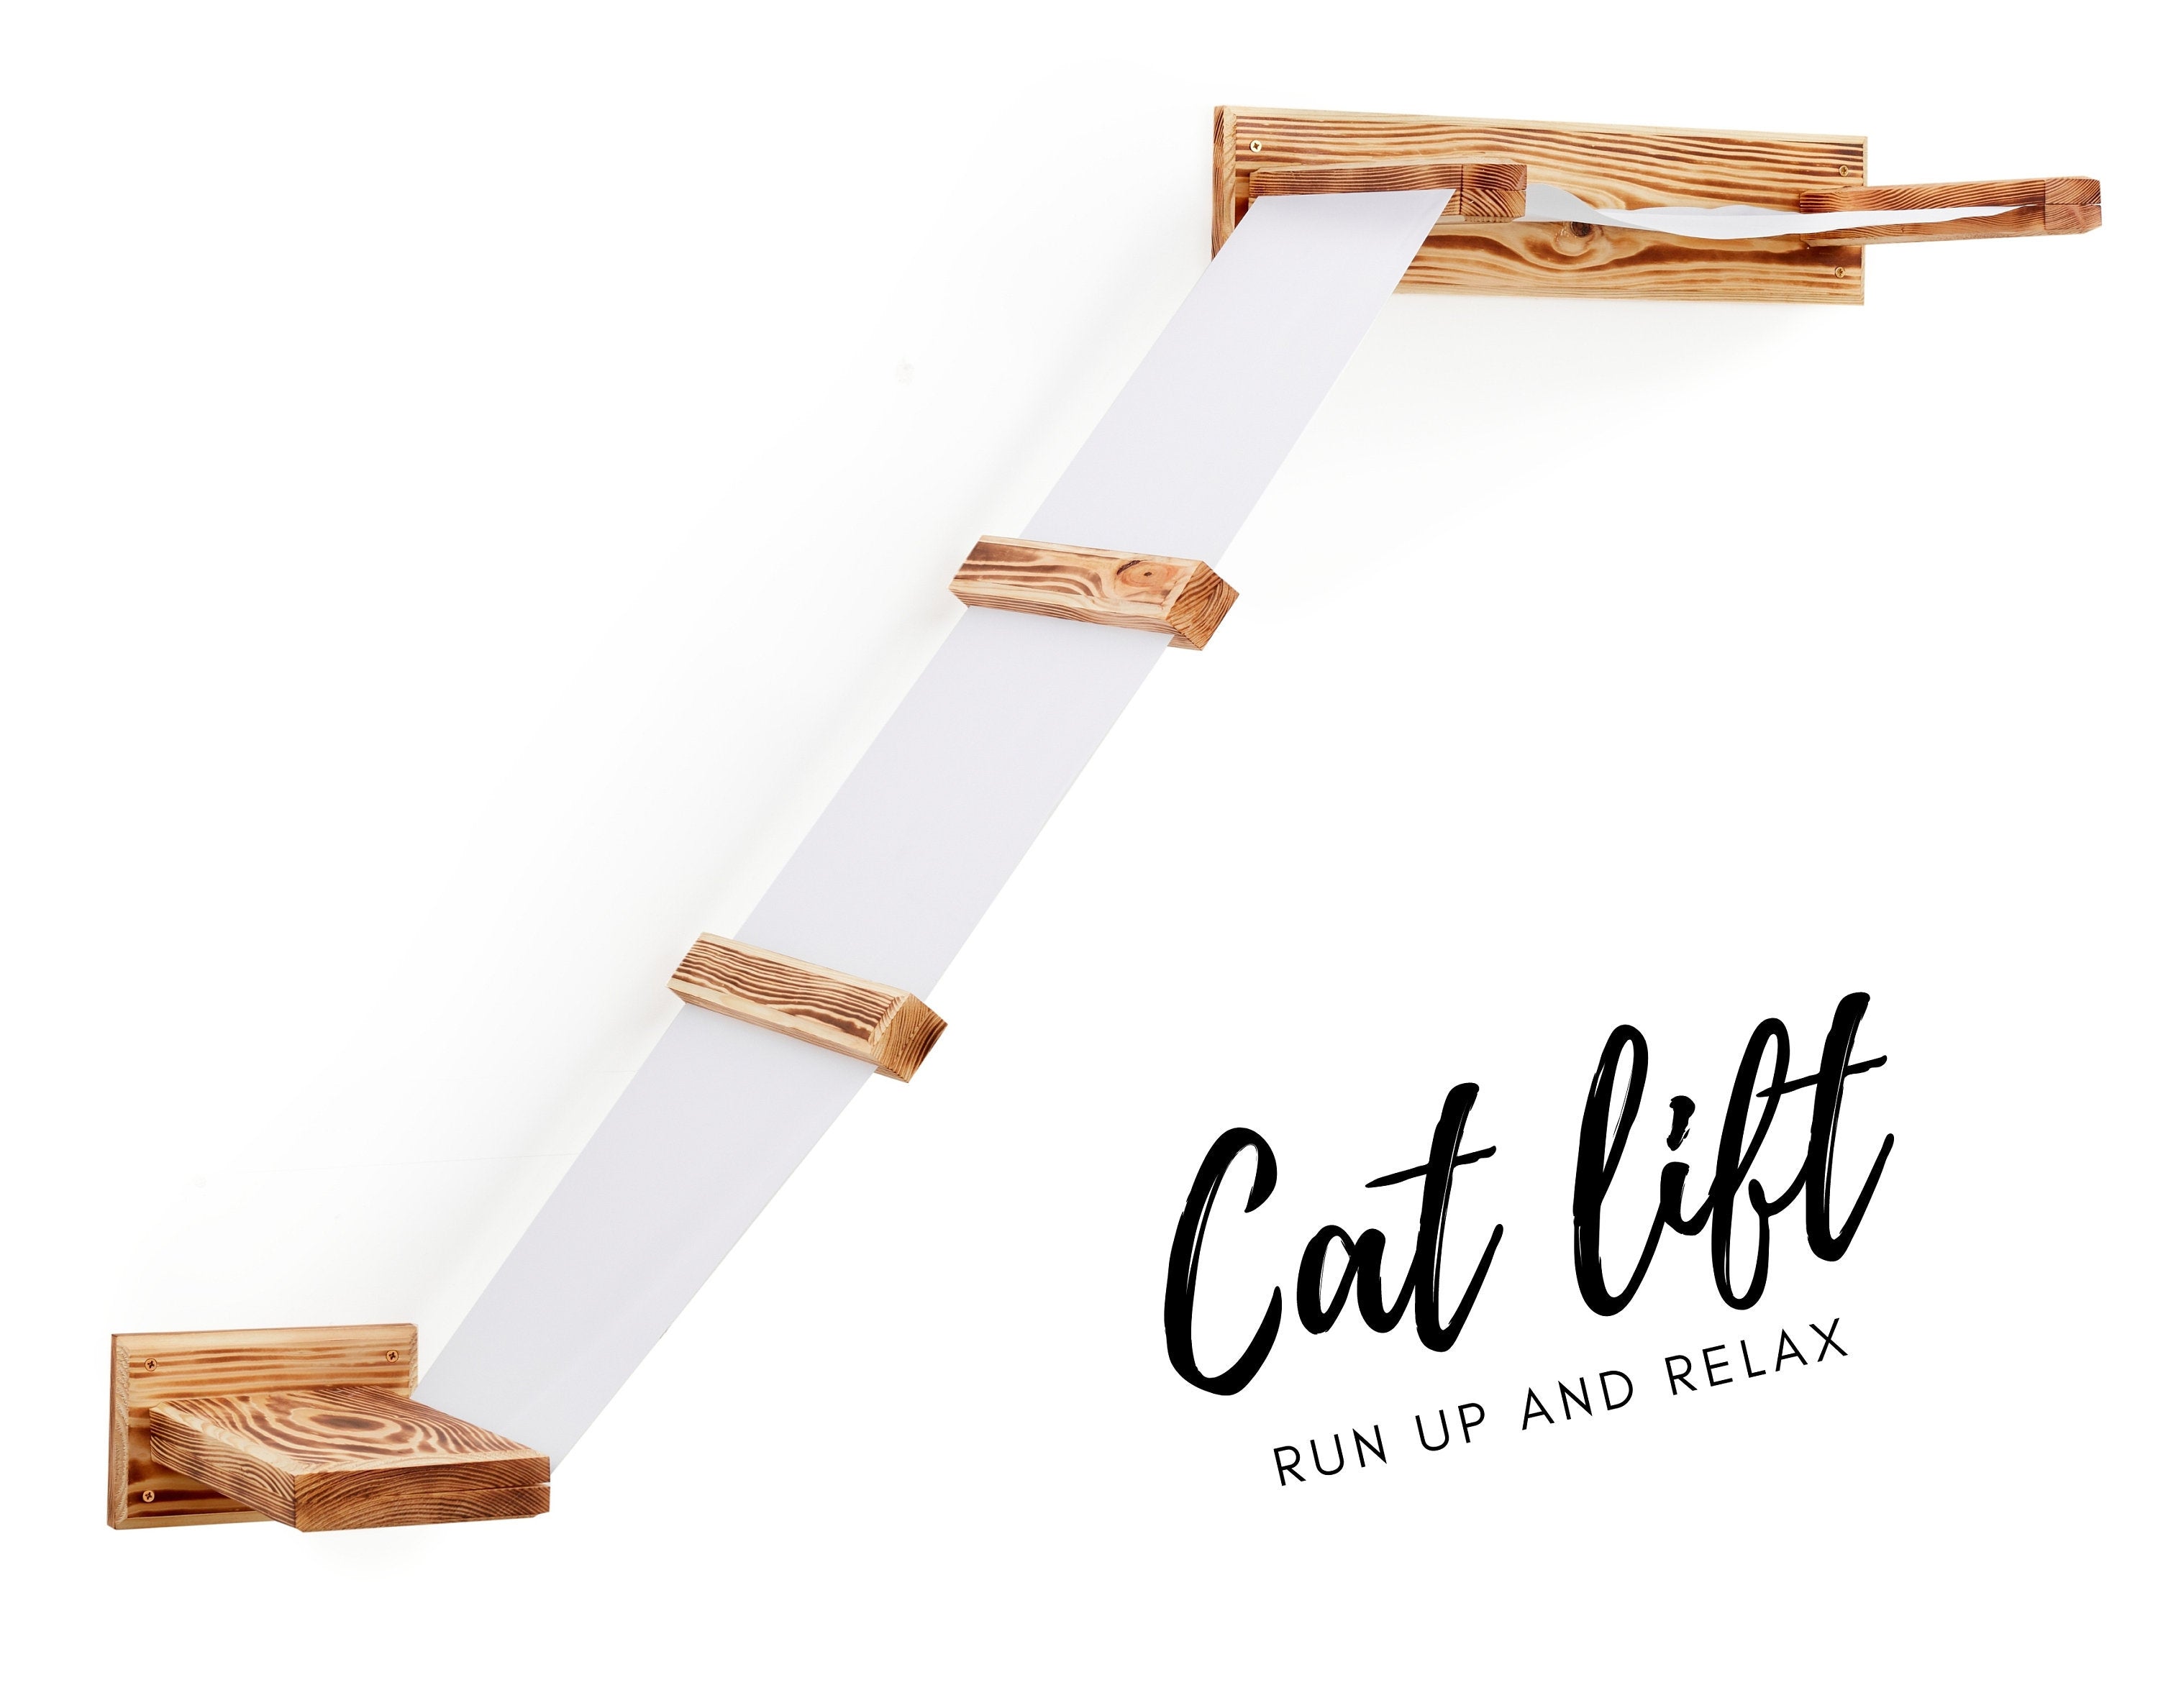 Large Wall Mounted Cat Shelf Lift Platform Bridge With Bed - Solid Wood Cat Sleeper Shelf - Wooden Cat Furniture Collection